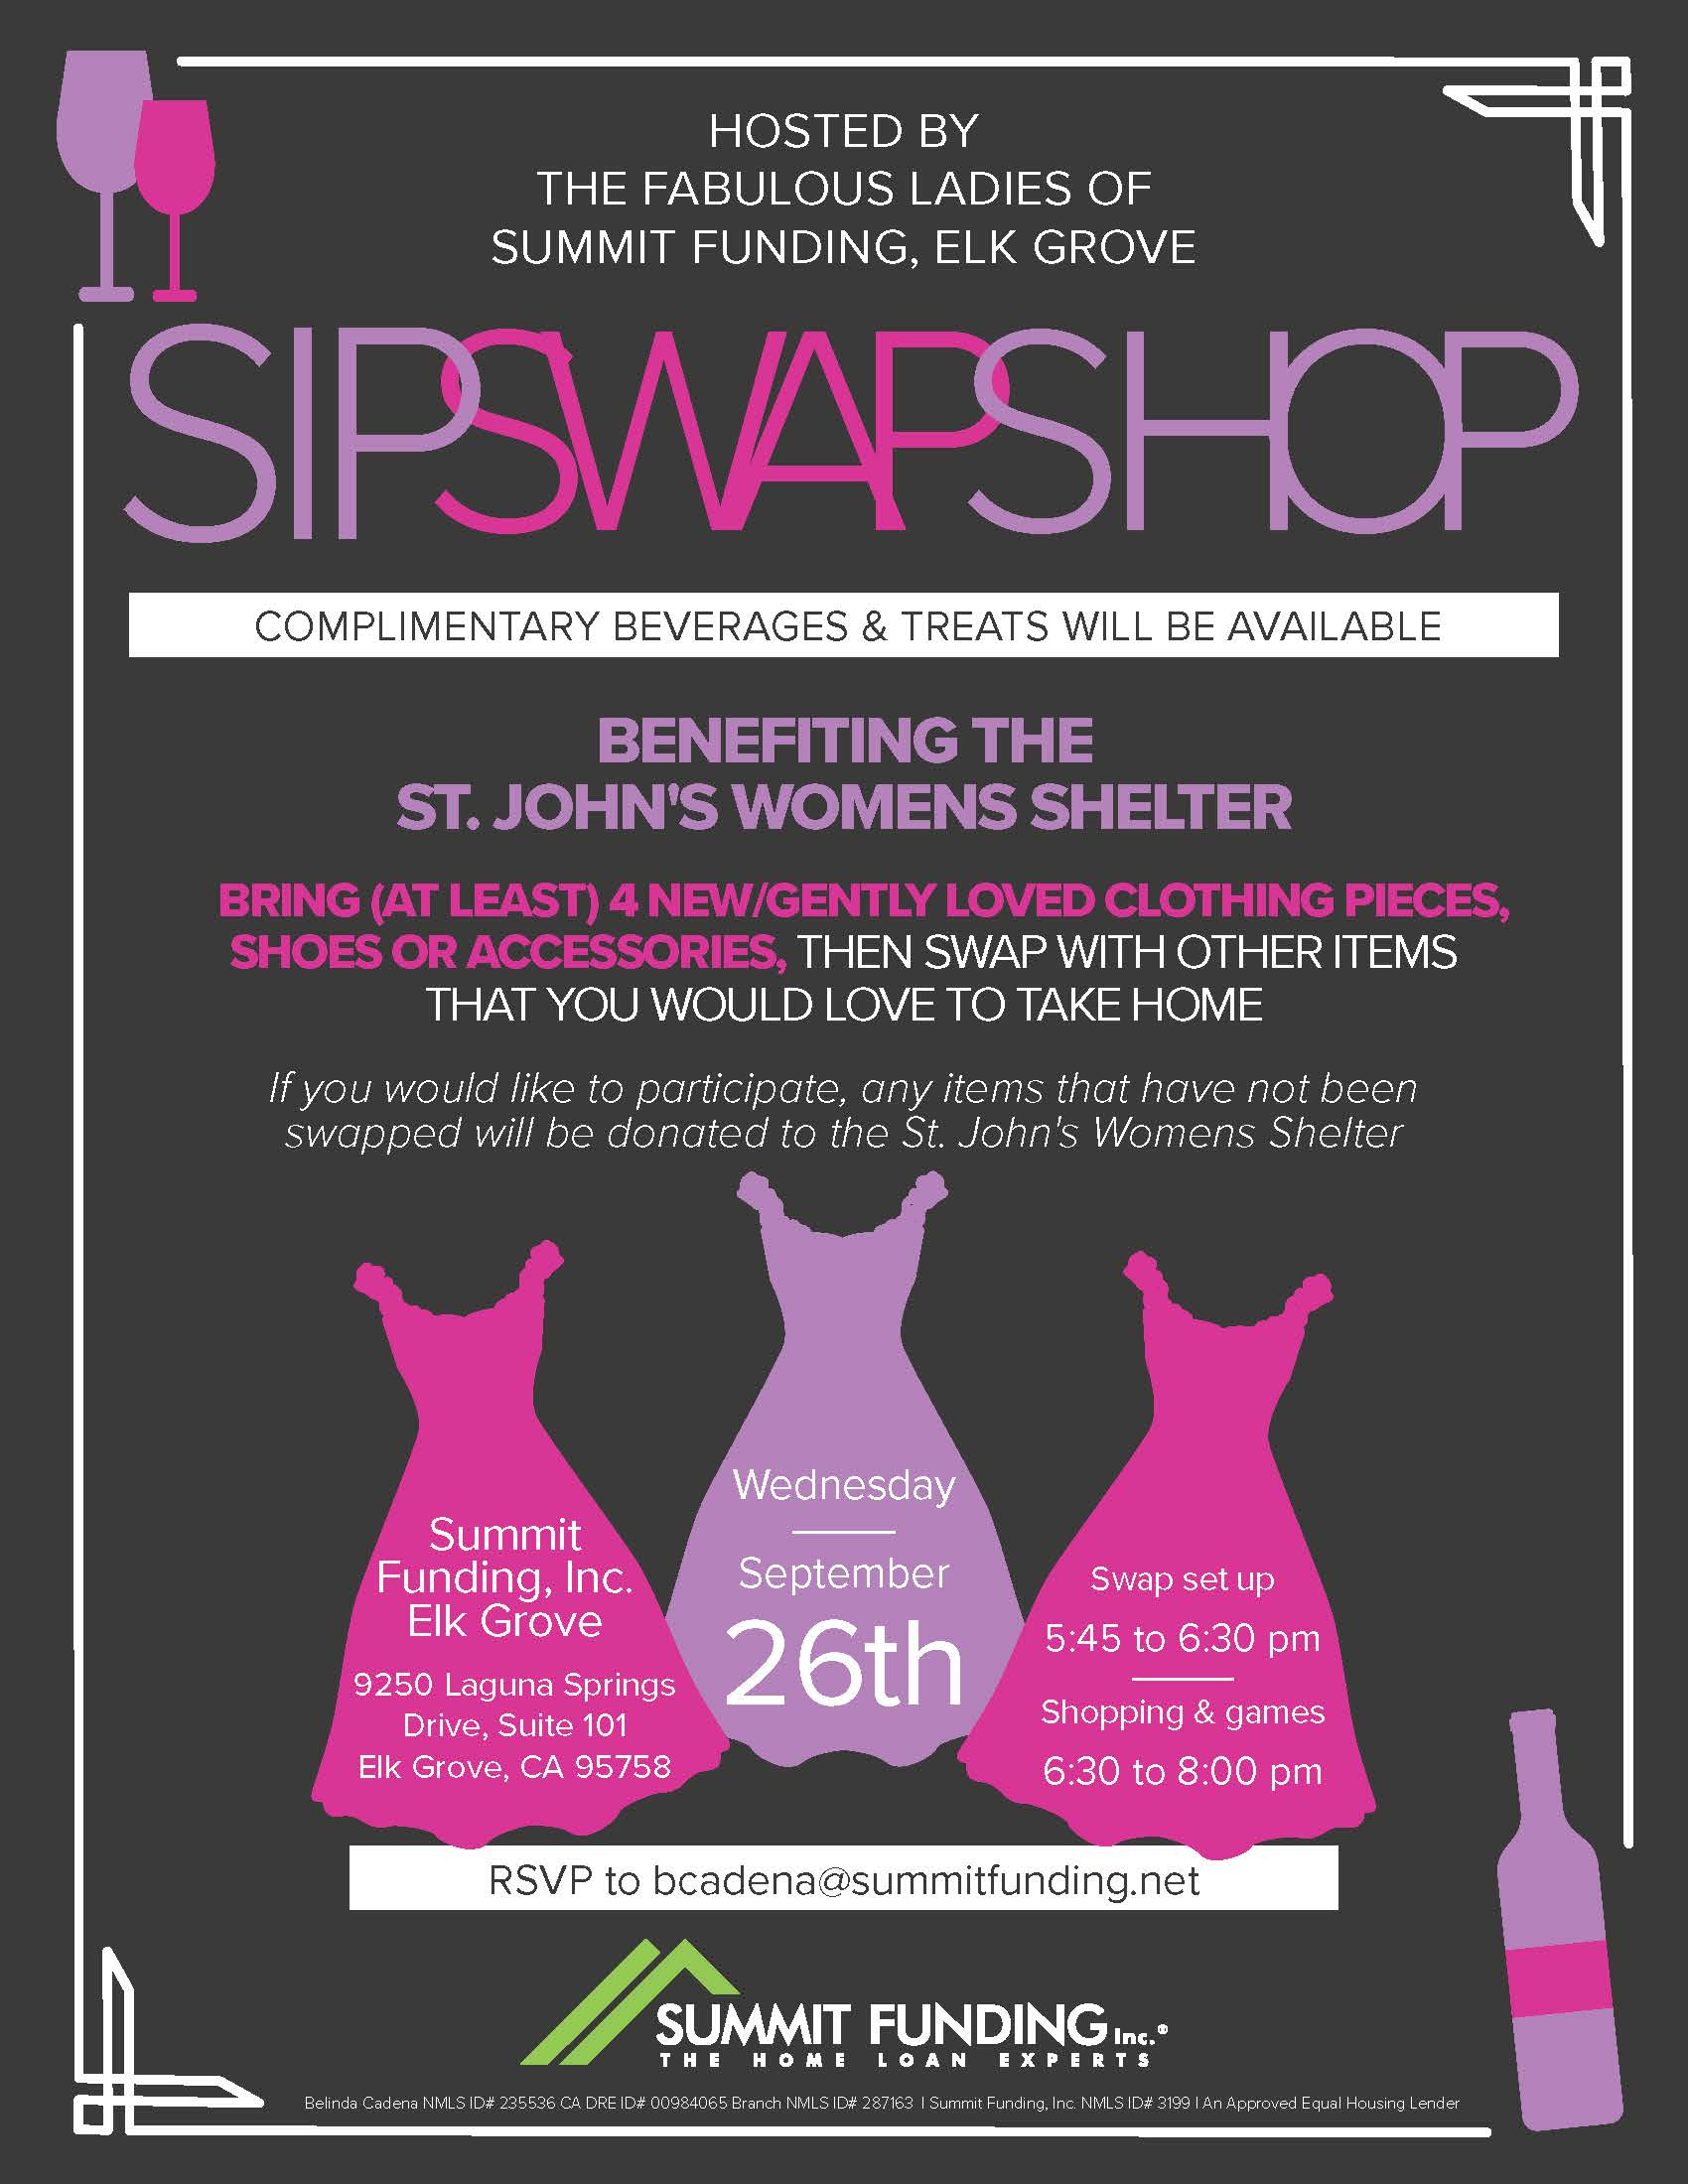 Clothing swap to benefit women's shelter